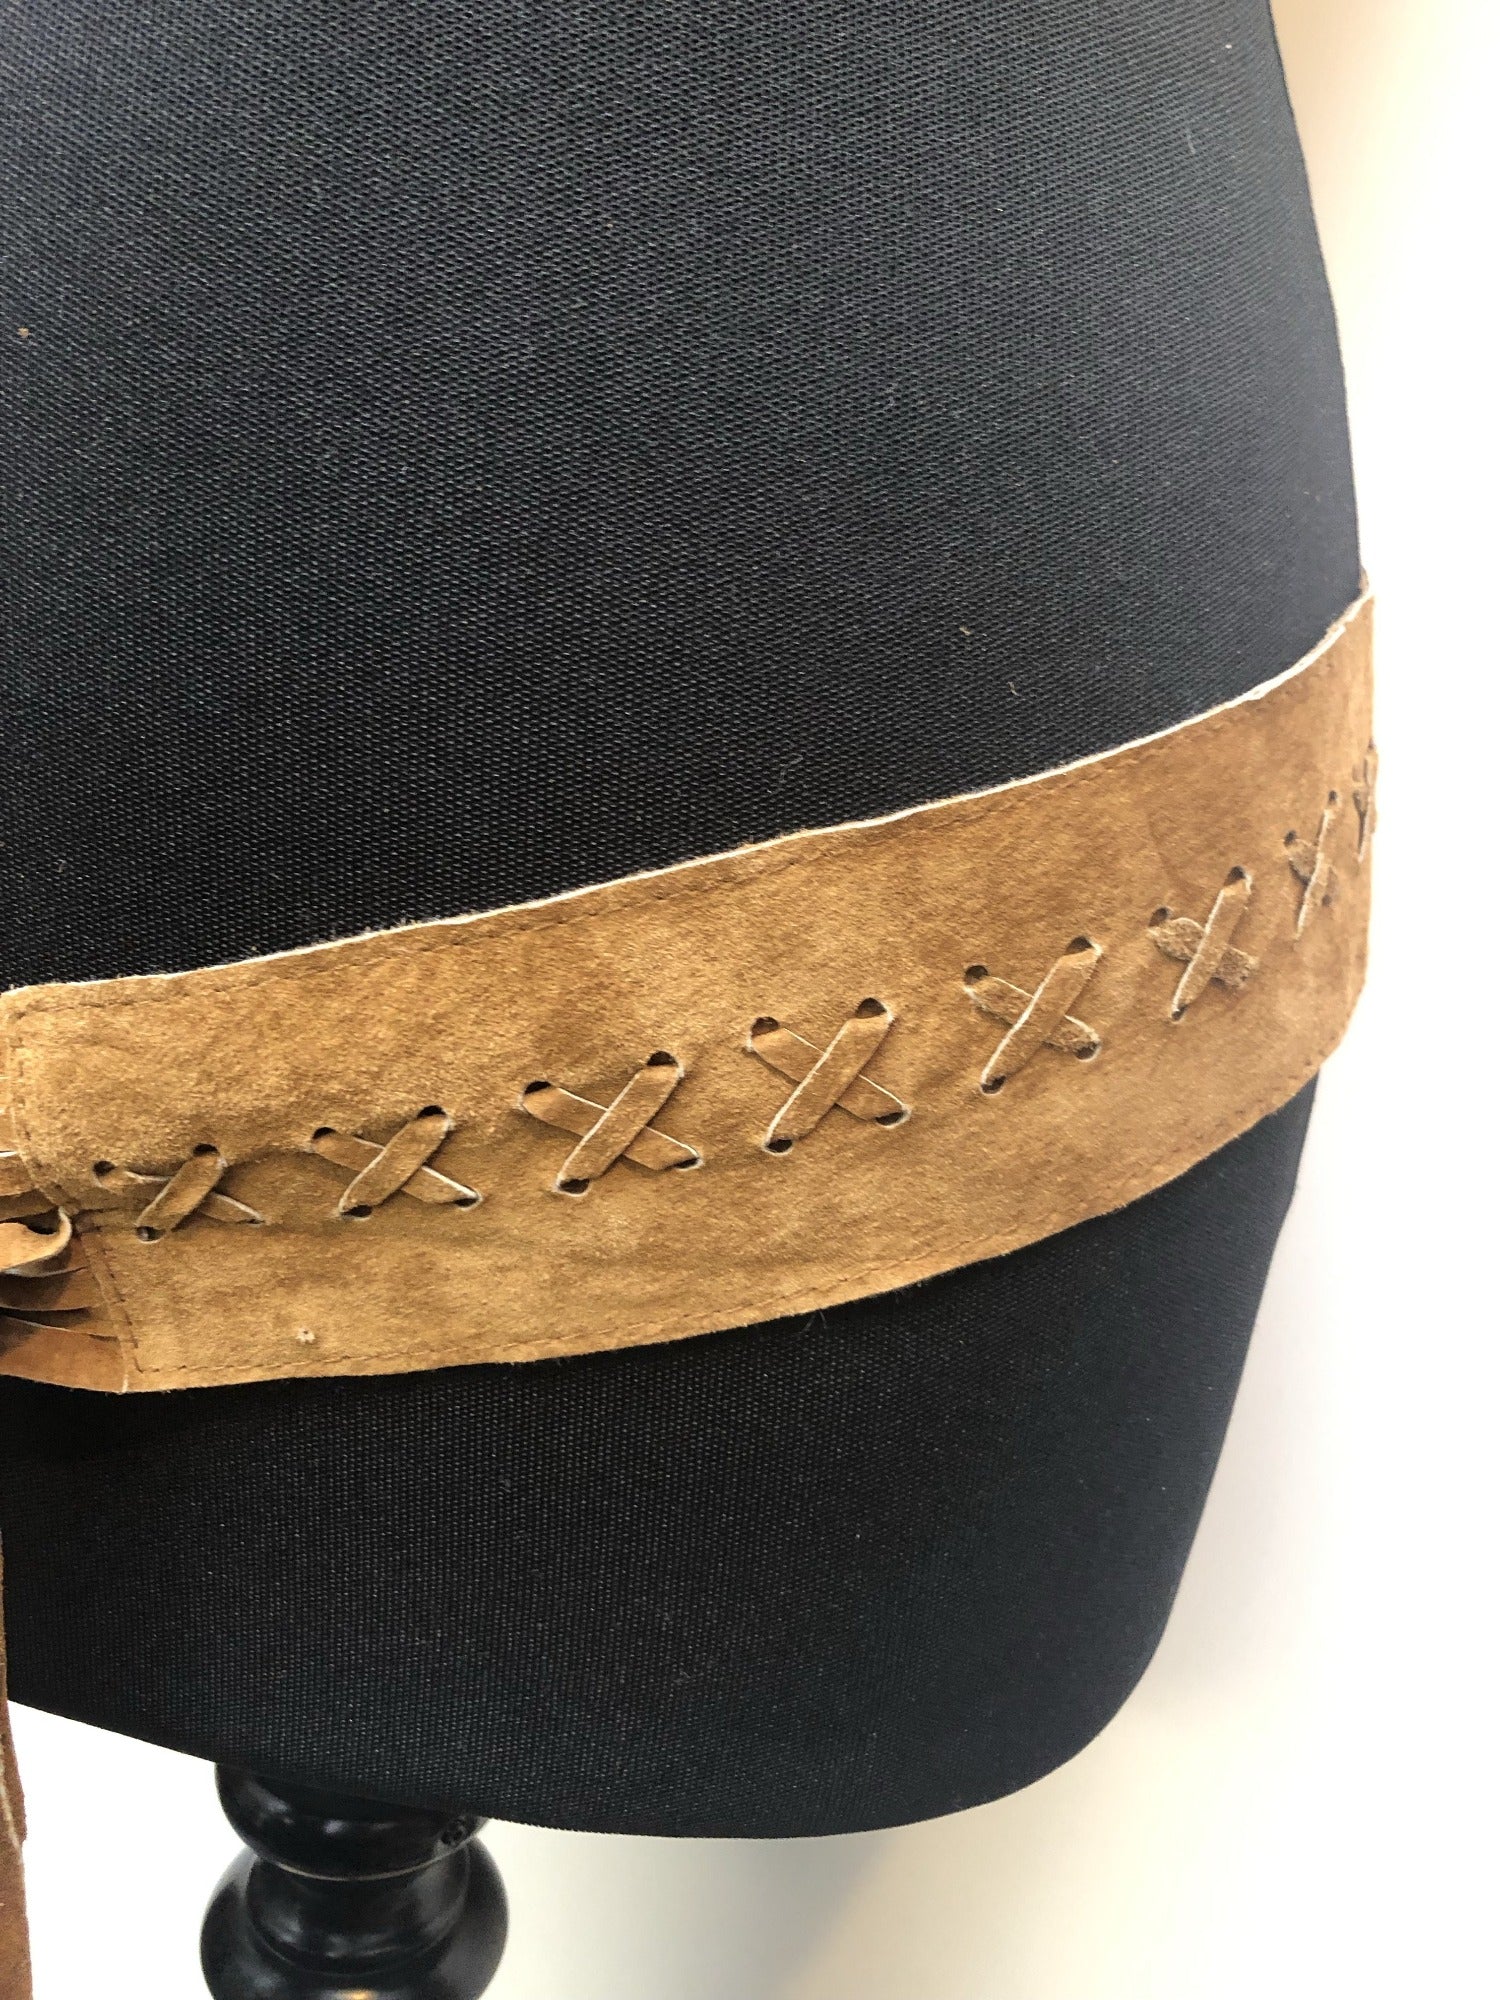 Woven  vintage  Urban Village Vintage  urban village  suede etching  One Size  mens  leather trim  leather braiding  Leather  fringed  brown  braiding  belted  belt  accesories  60s  60  1960s  1960